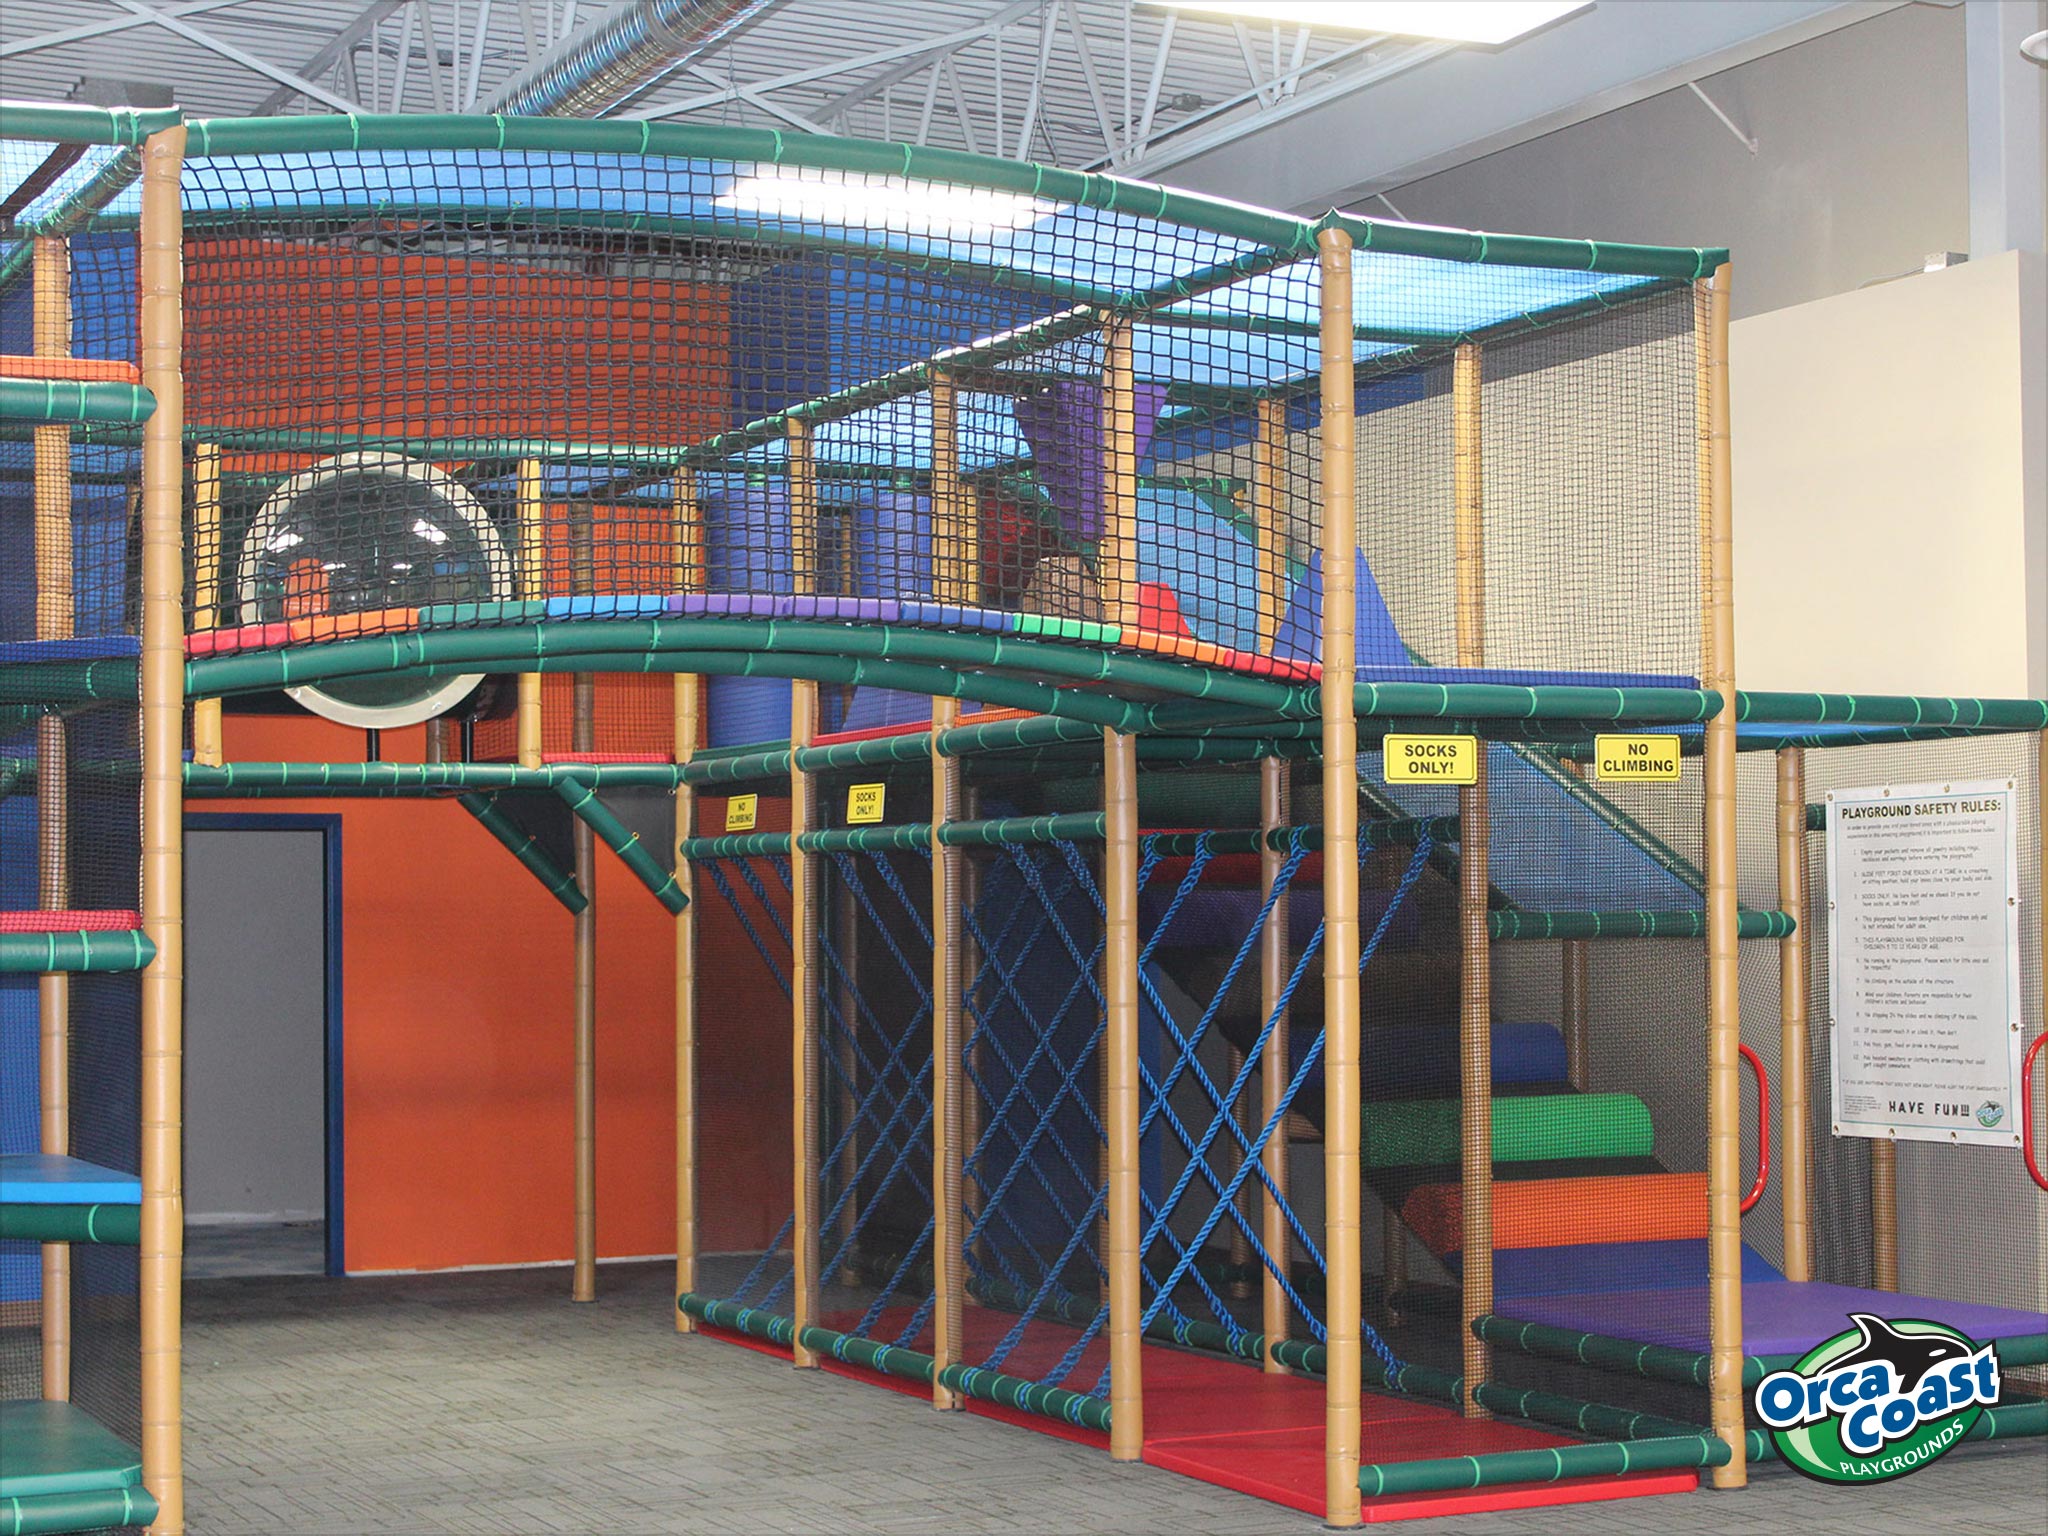 Cafe indoor playground built by orcacoastplay.com